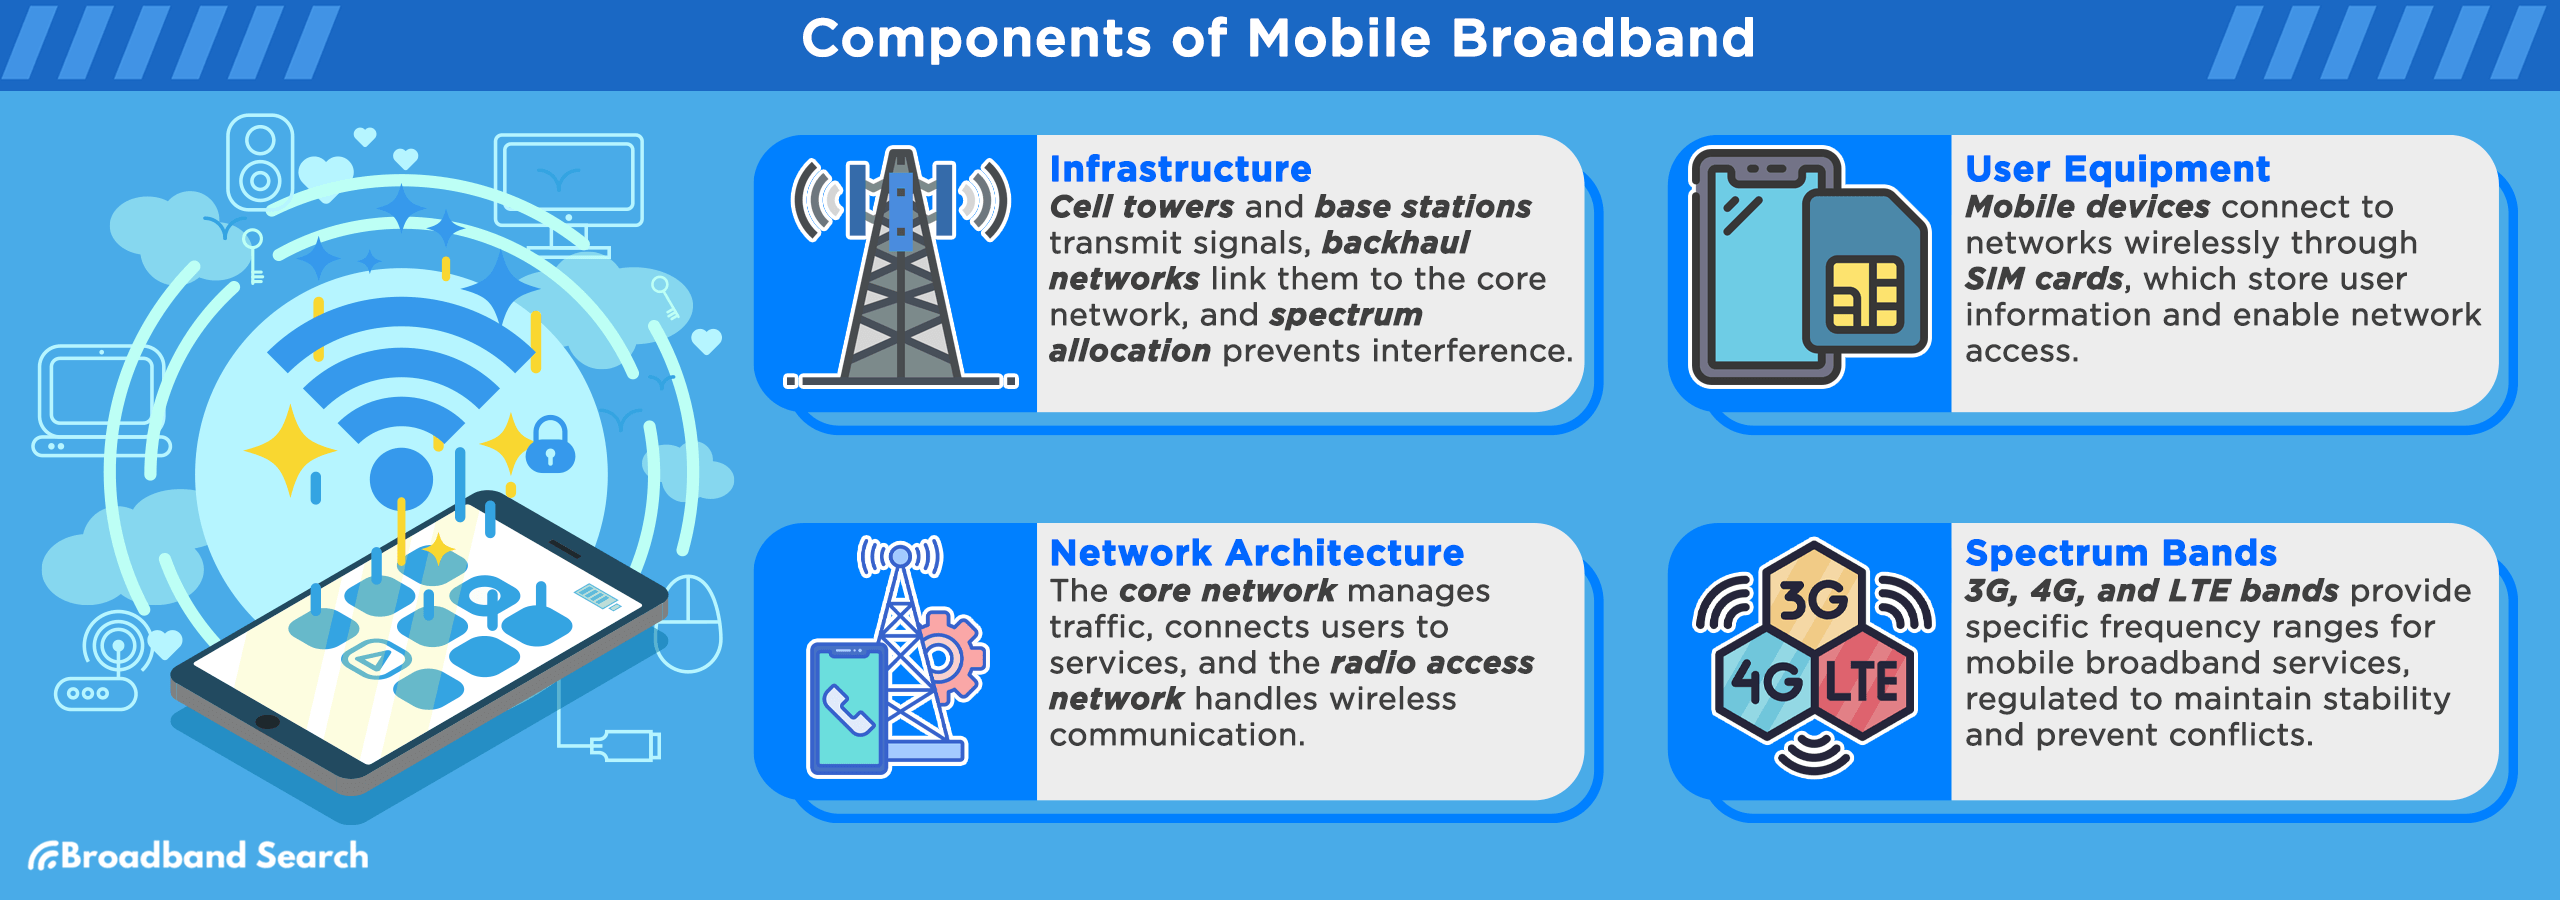 Components of Mobile Broadband